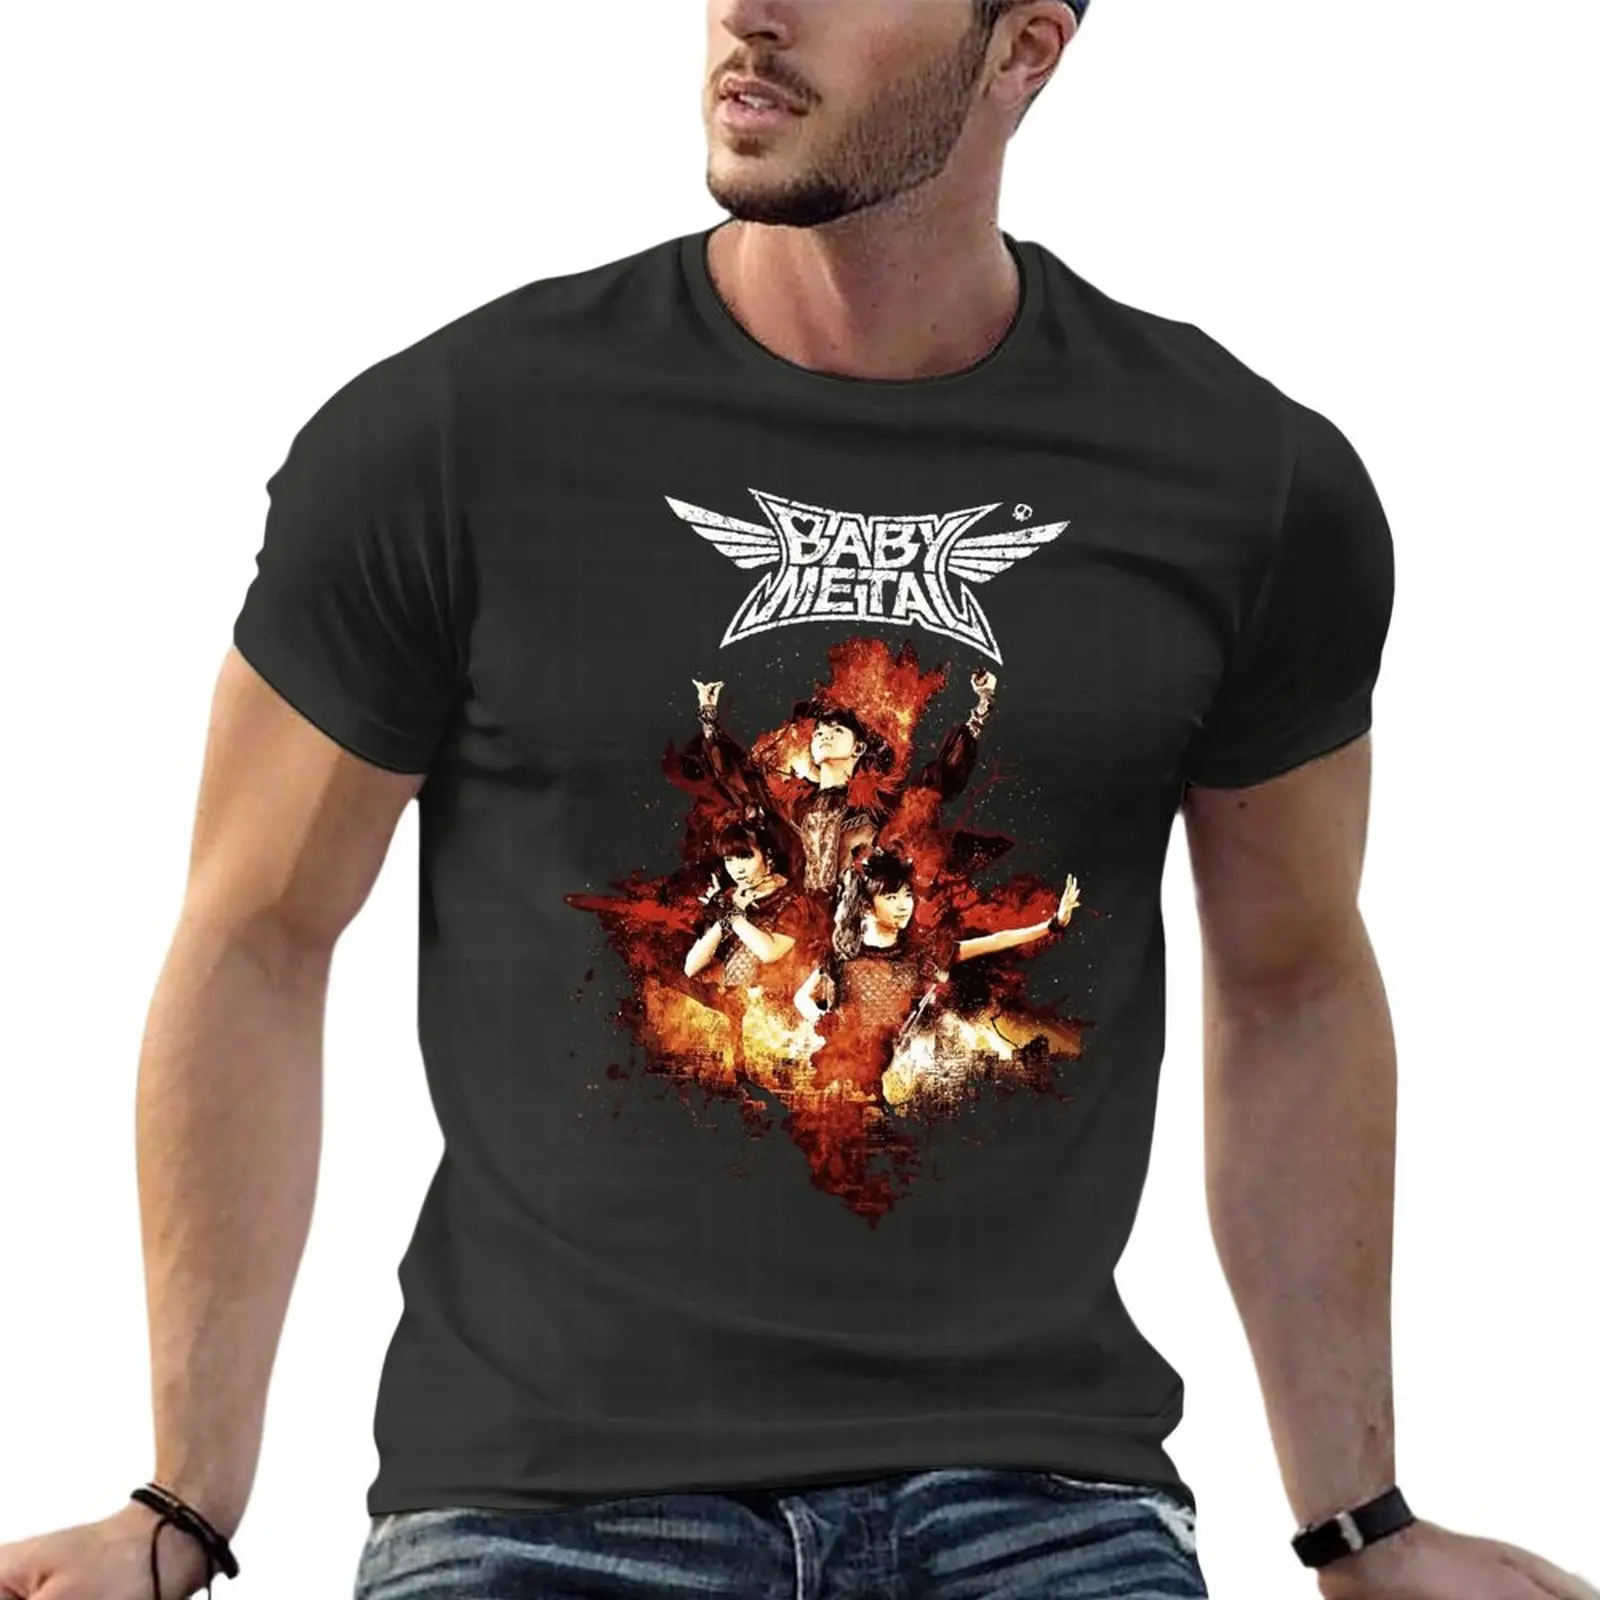 Lmxool Babymetal Heavy Metal Band Oversized T Shirts Summer Mens Clothes Short Sleeve Streetwear Plus Size Top Tee